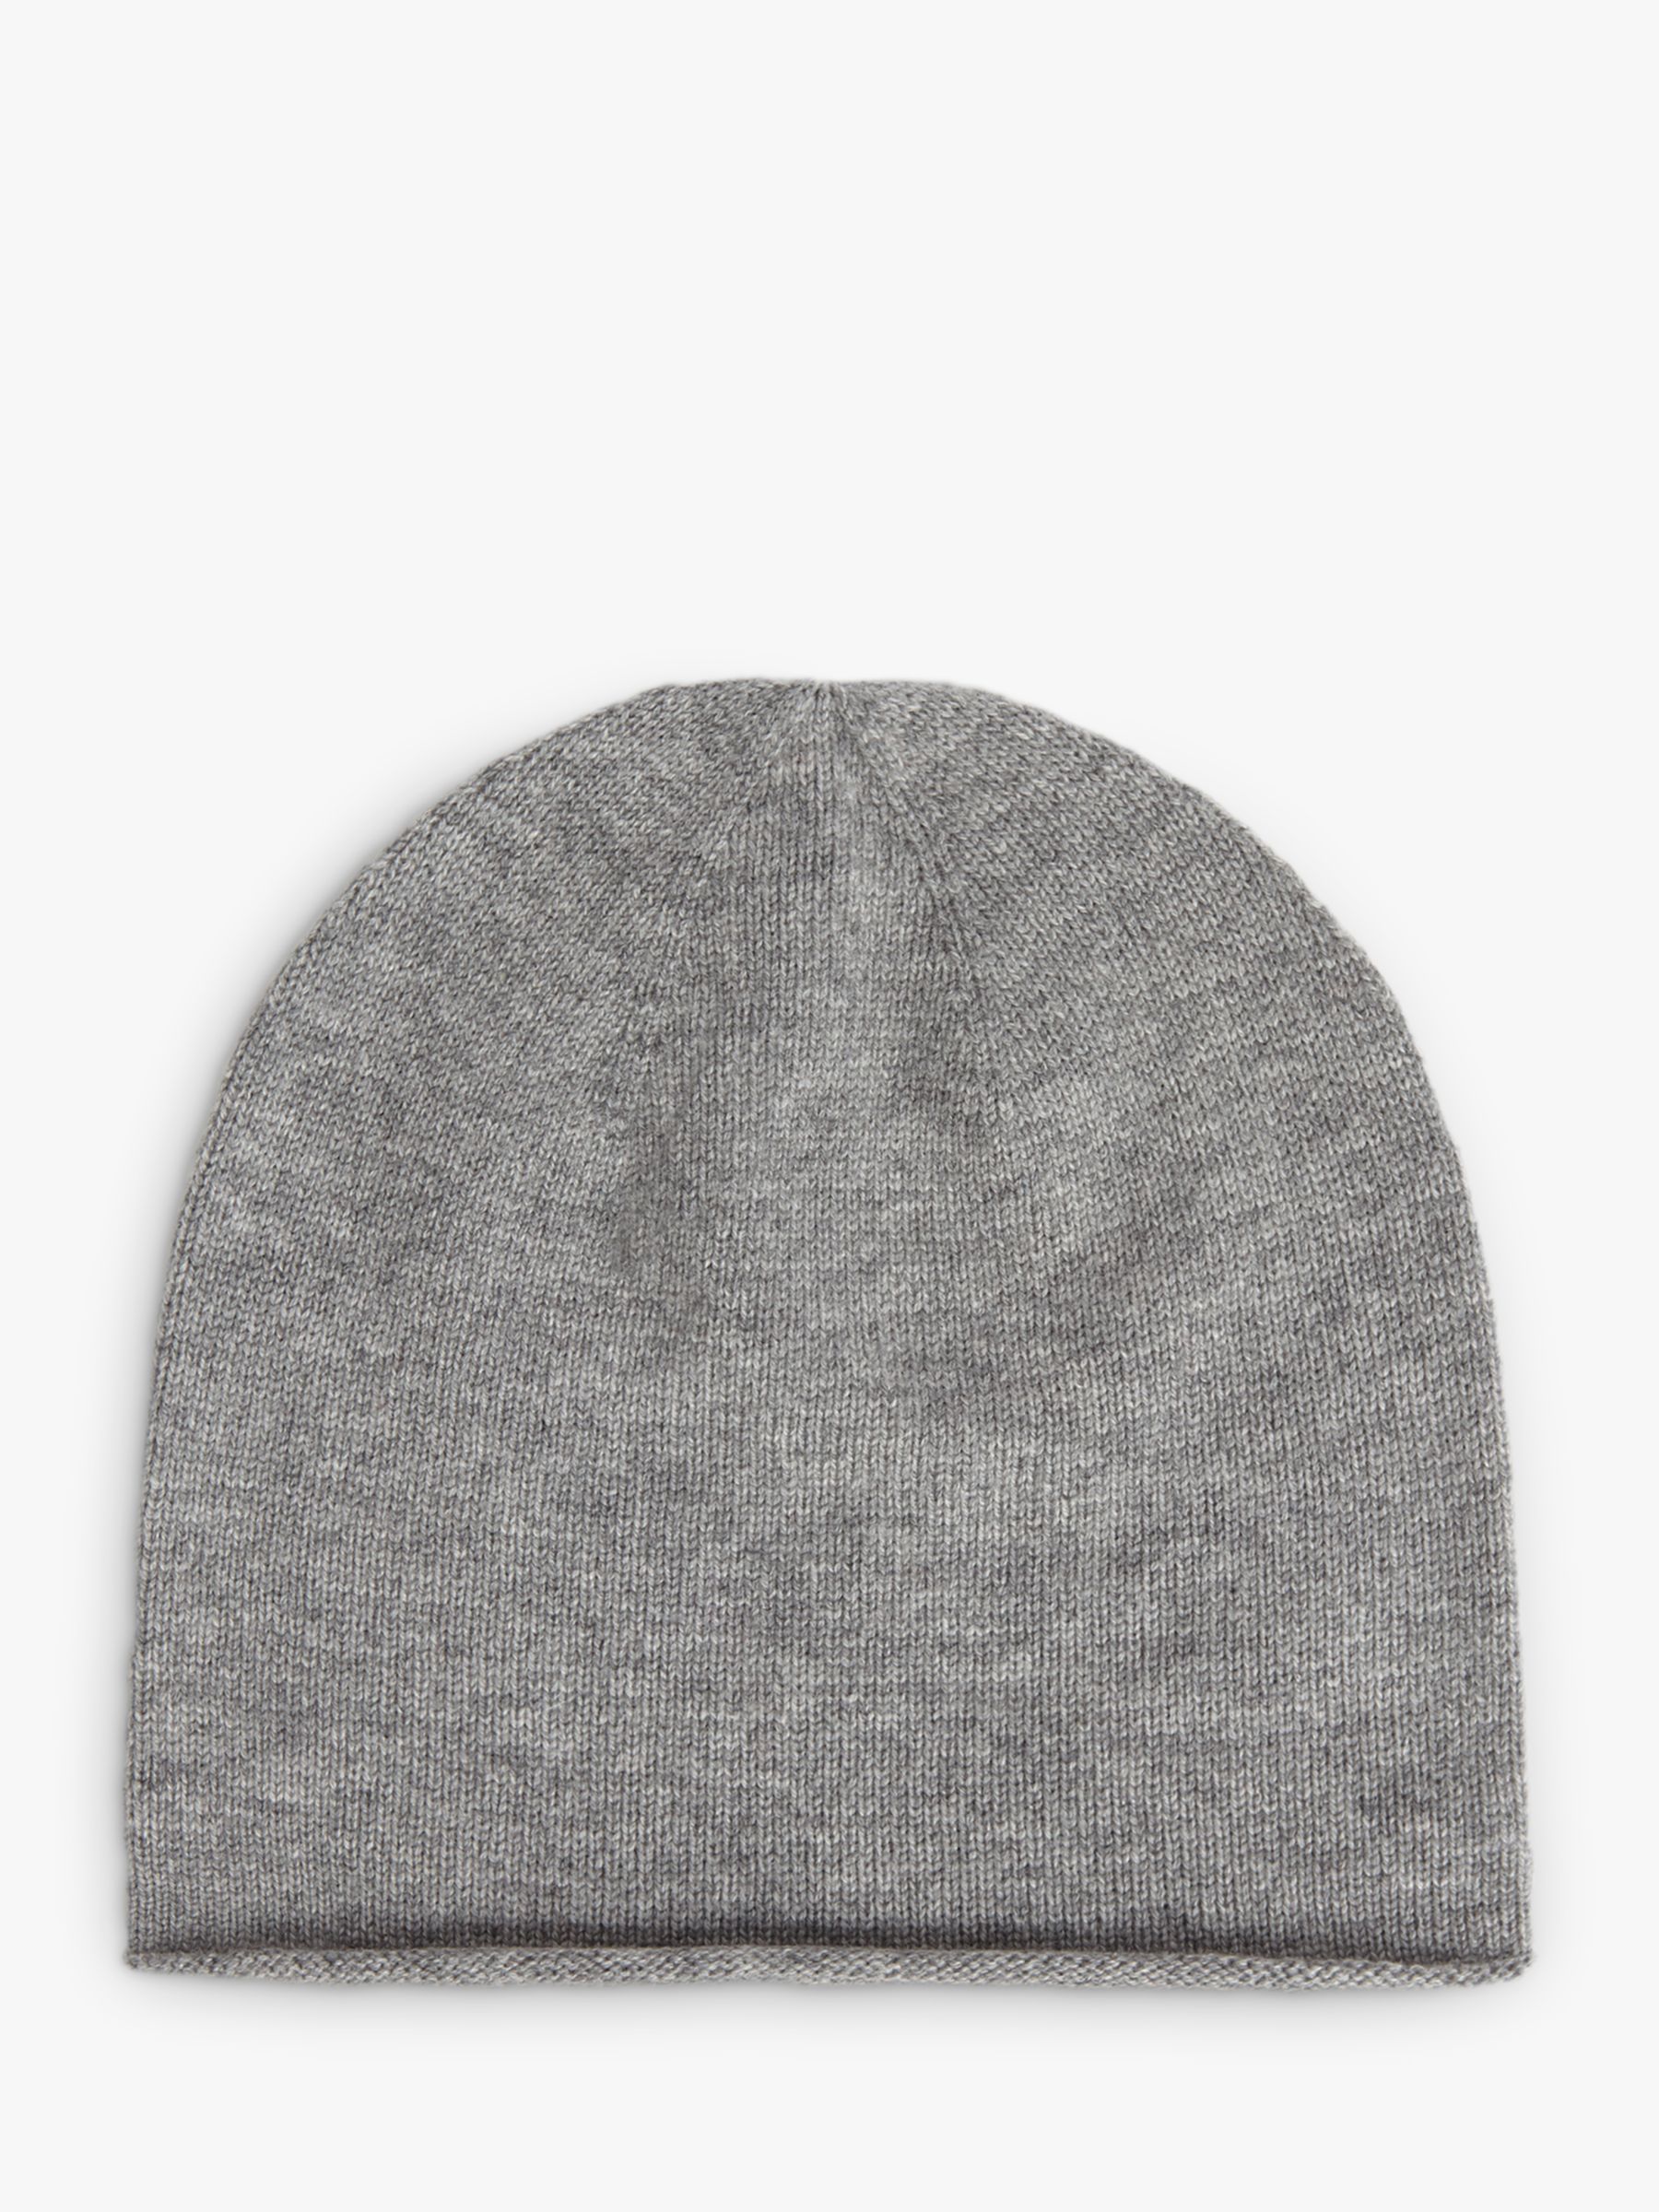 AllSaints Wool & Cashmere Self Rolled Edge Beanie, Pale Grey at John ...